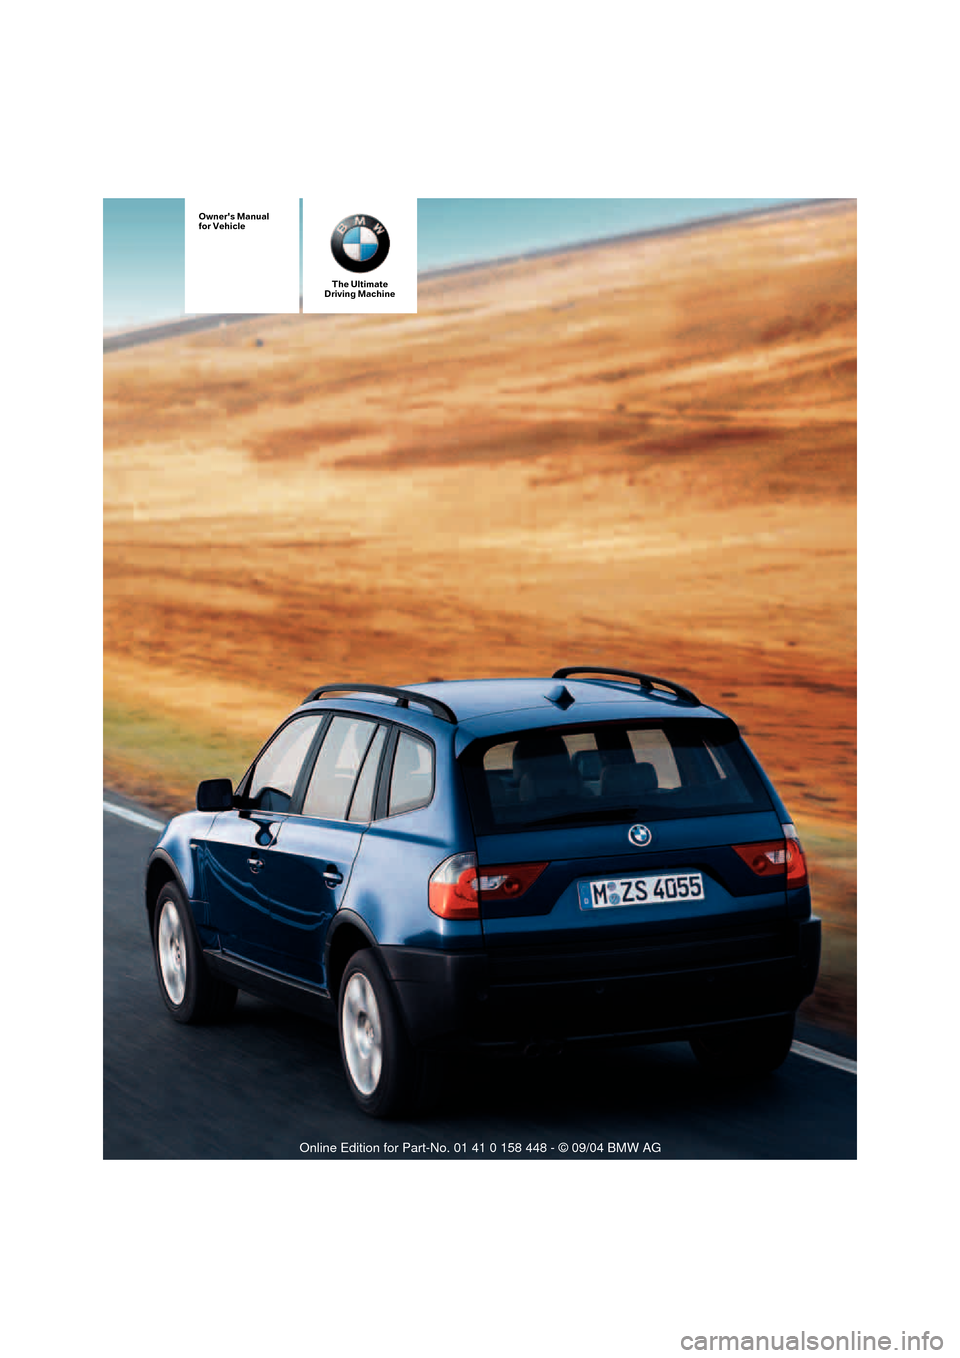 BMW X3 3.0I 2005 E83 Owners Manual The Ultimate
Driving Machine
Owners Manual
for Vehicle 